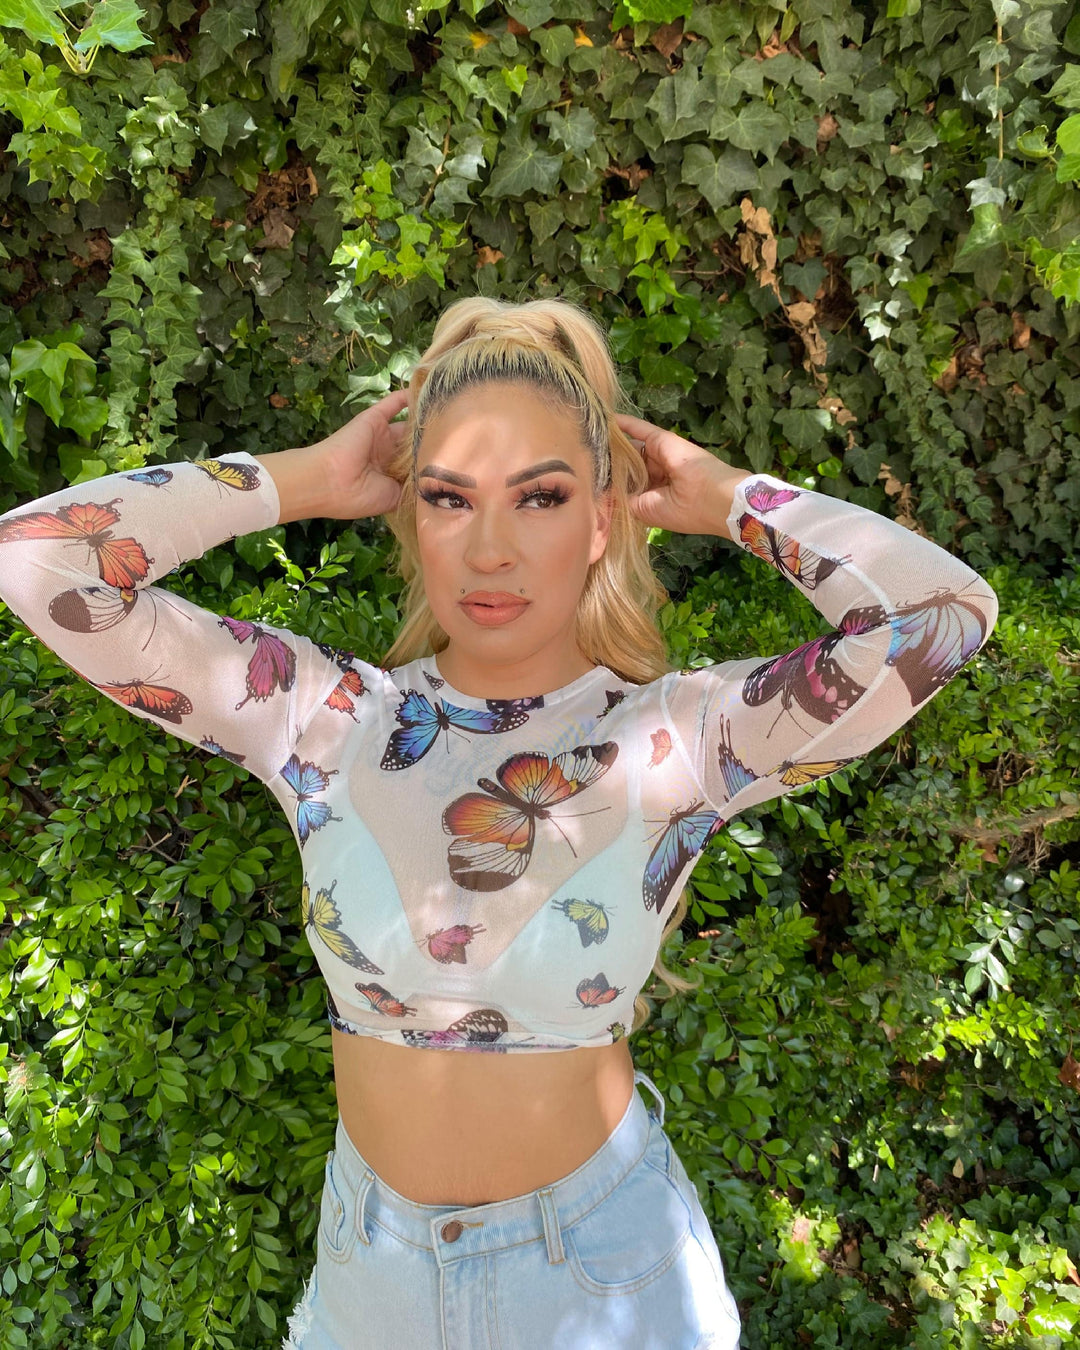 Clarissa Butterfly Mesh Crop Top - Style Baby OMG Fashion Boutique - Stylebabyomg - Buy - Aesthetic Baddie Outfits - Babyboo - OOTD - Shie 